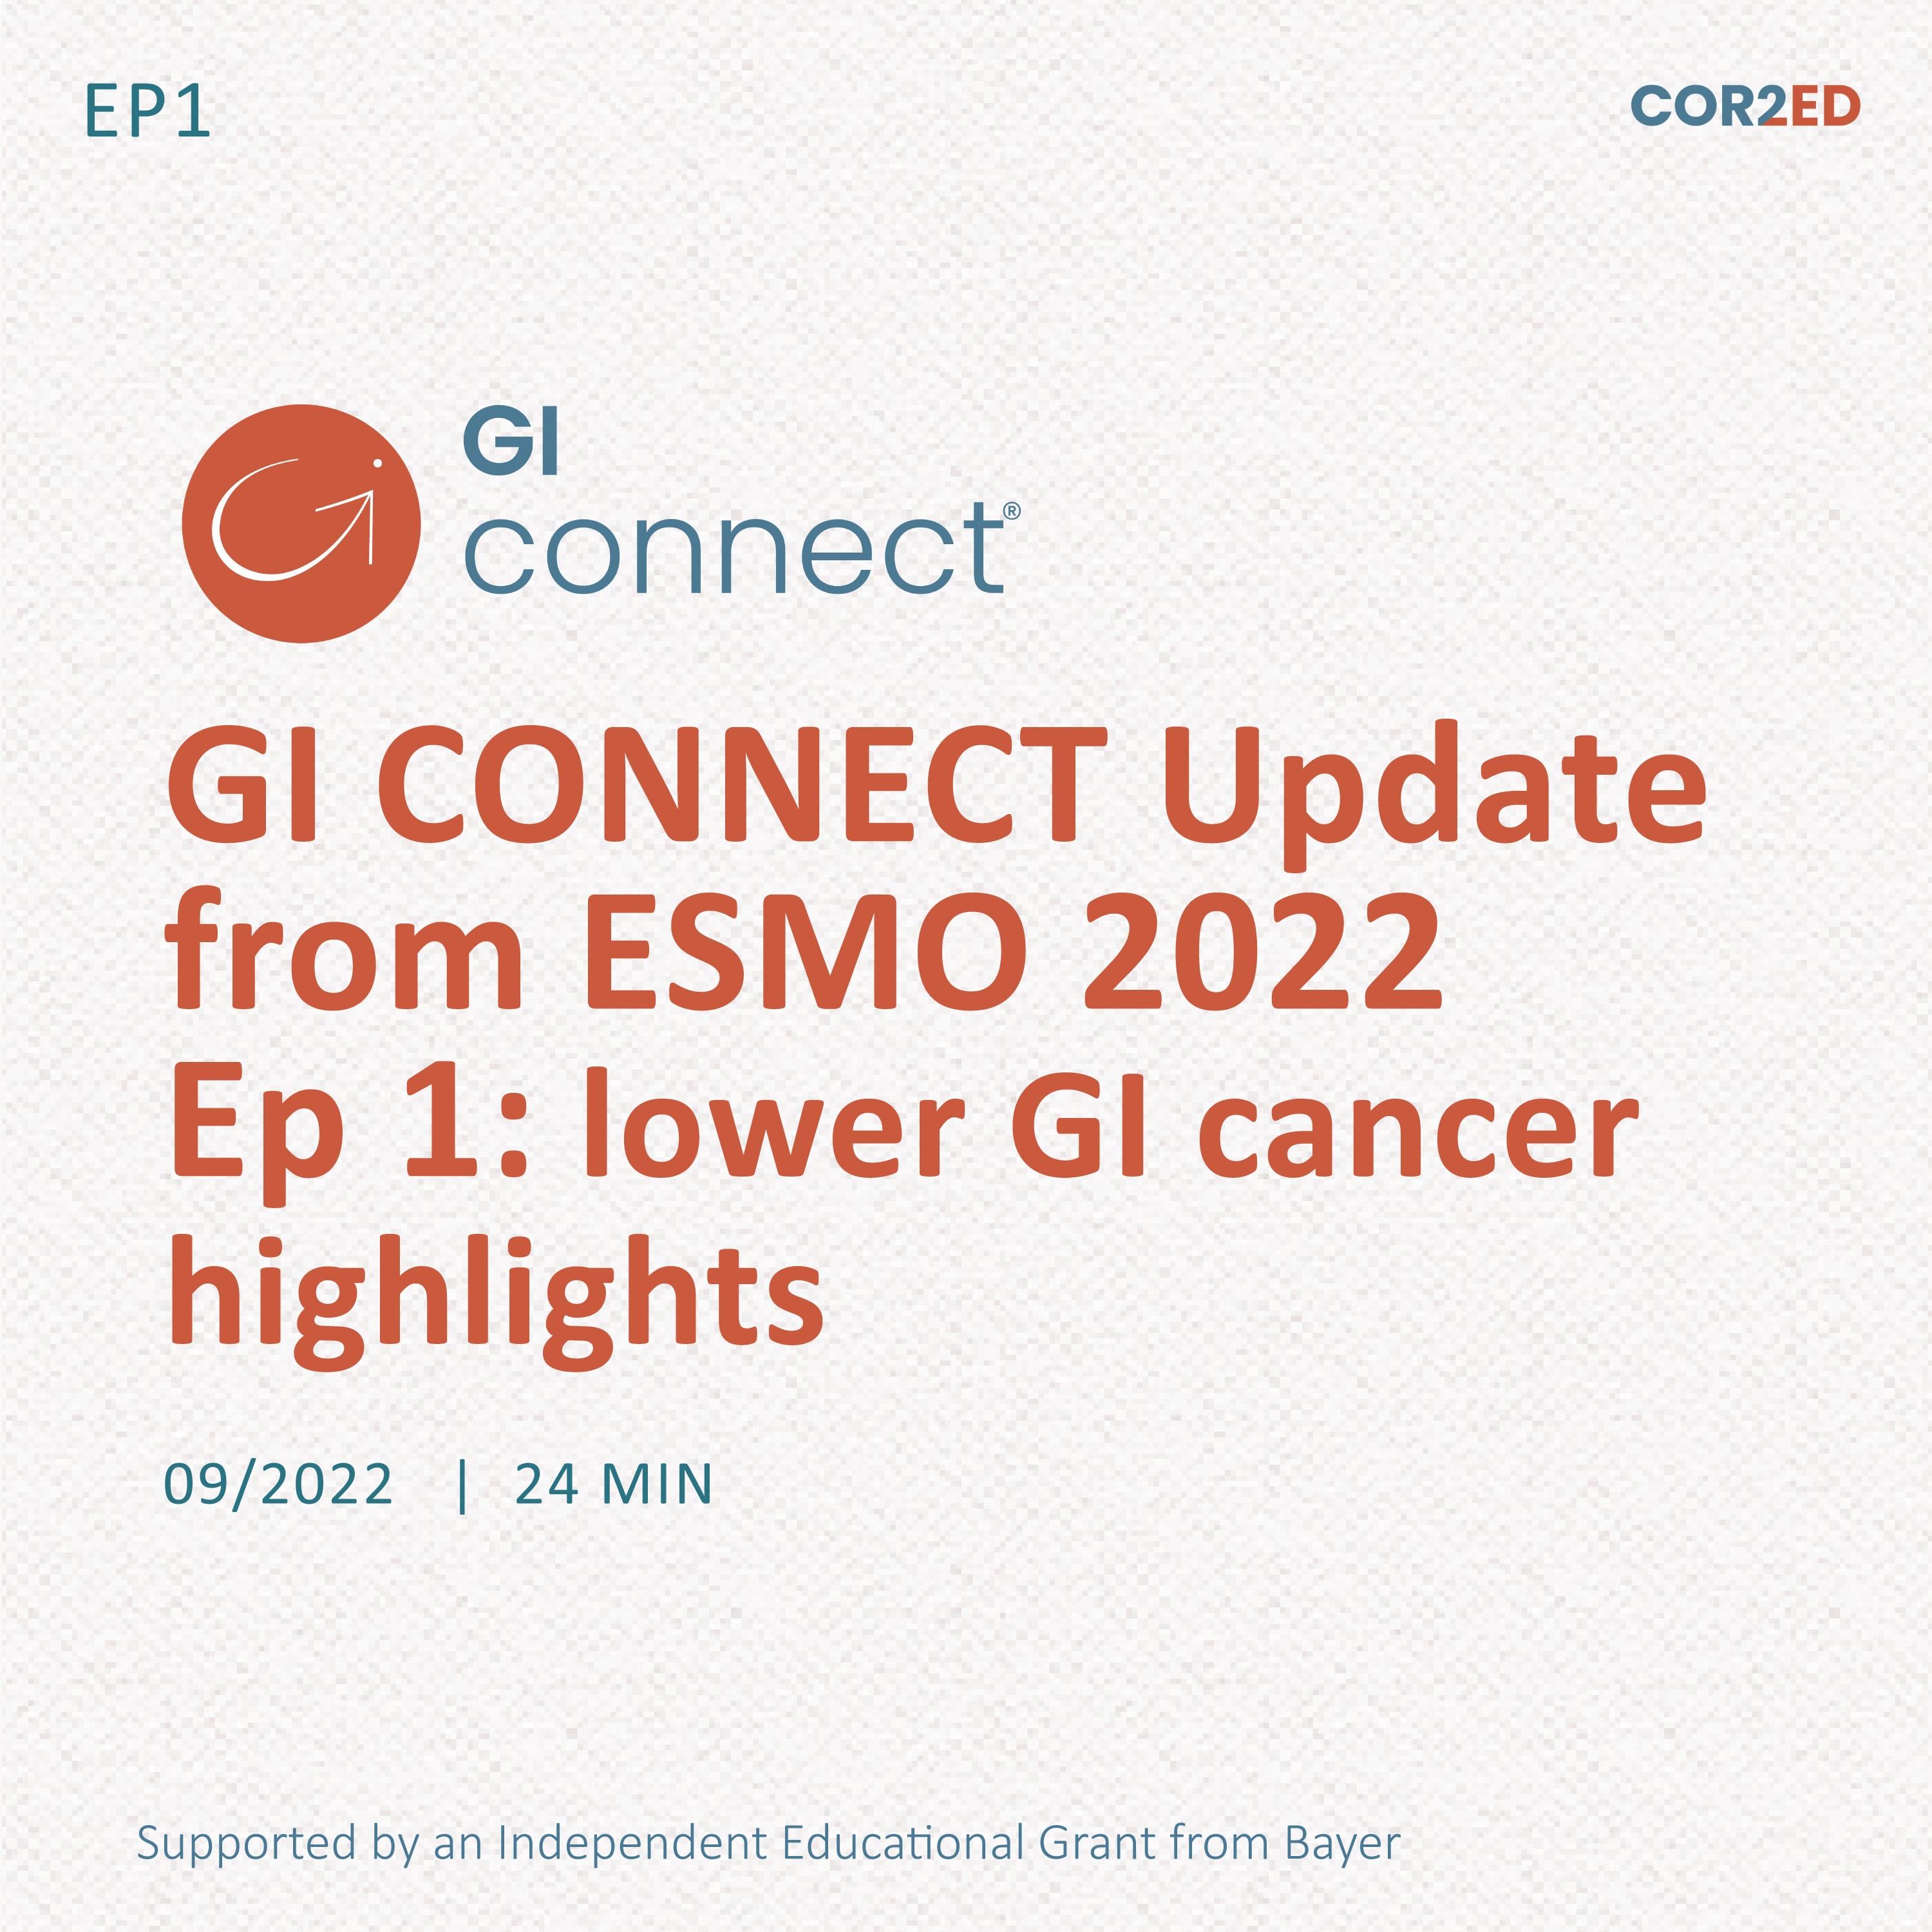 GI CONNECT Update from ESMO 2022 Ep 1: lower GI cancer highlights